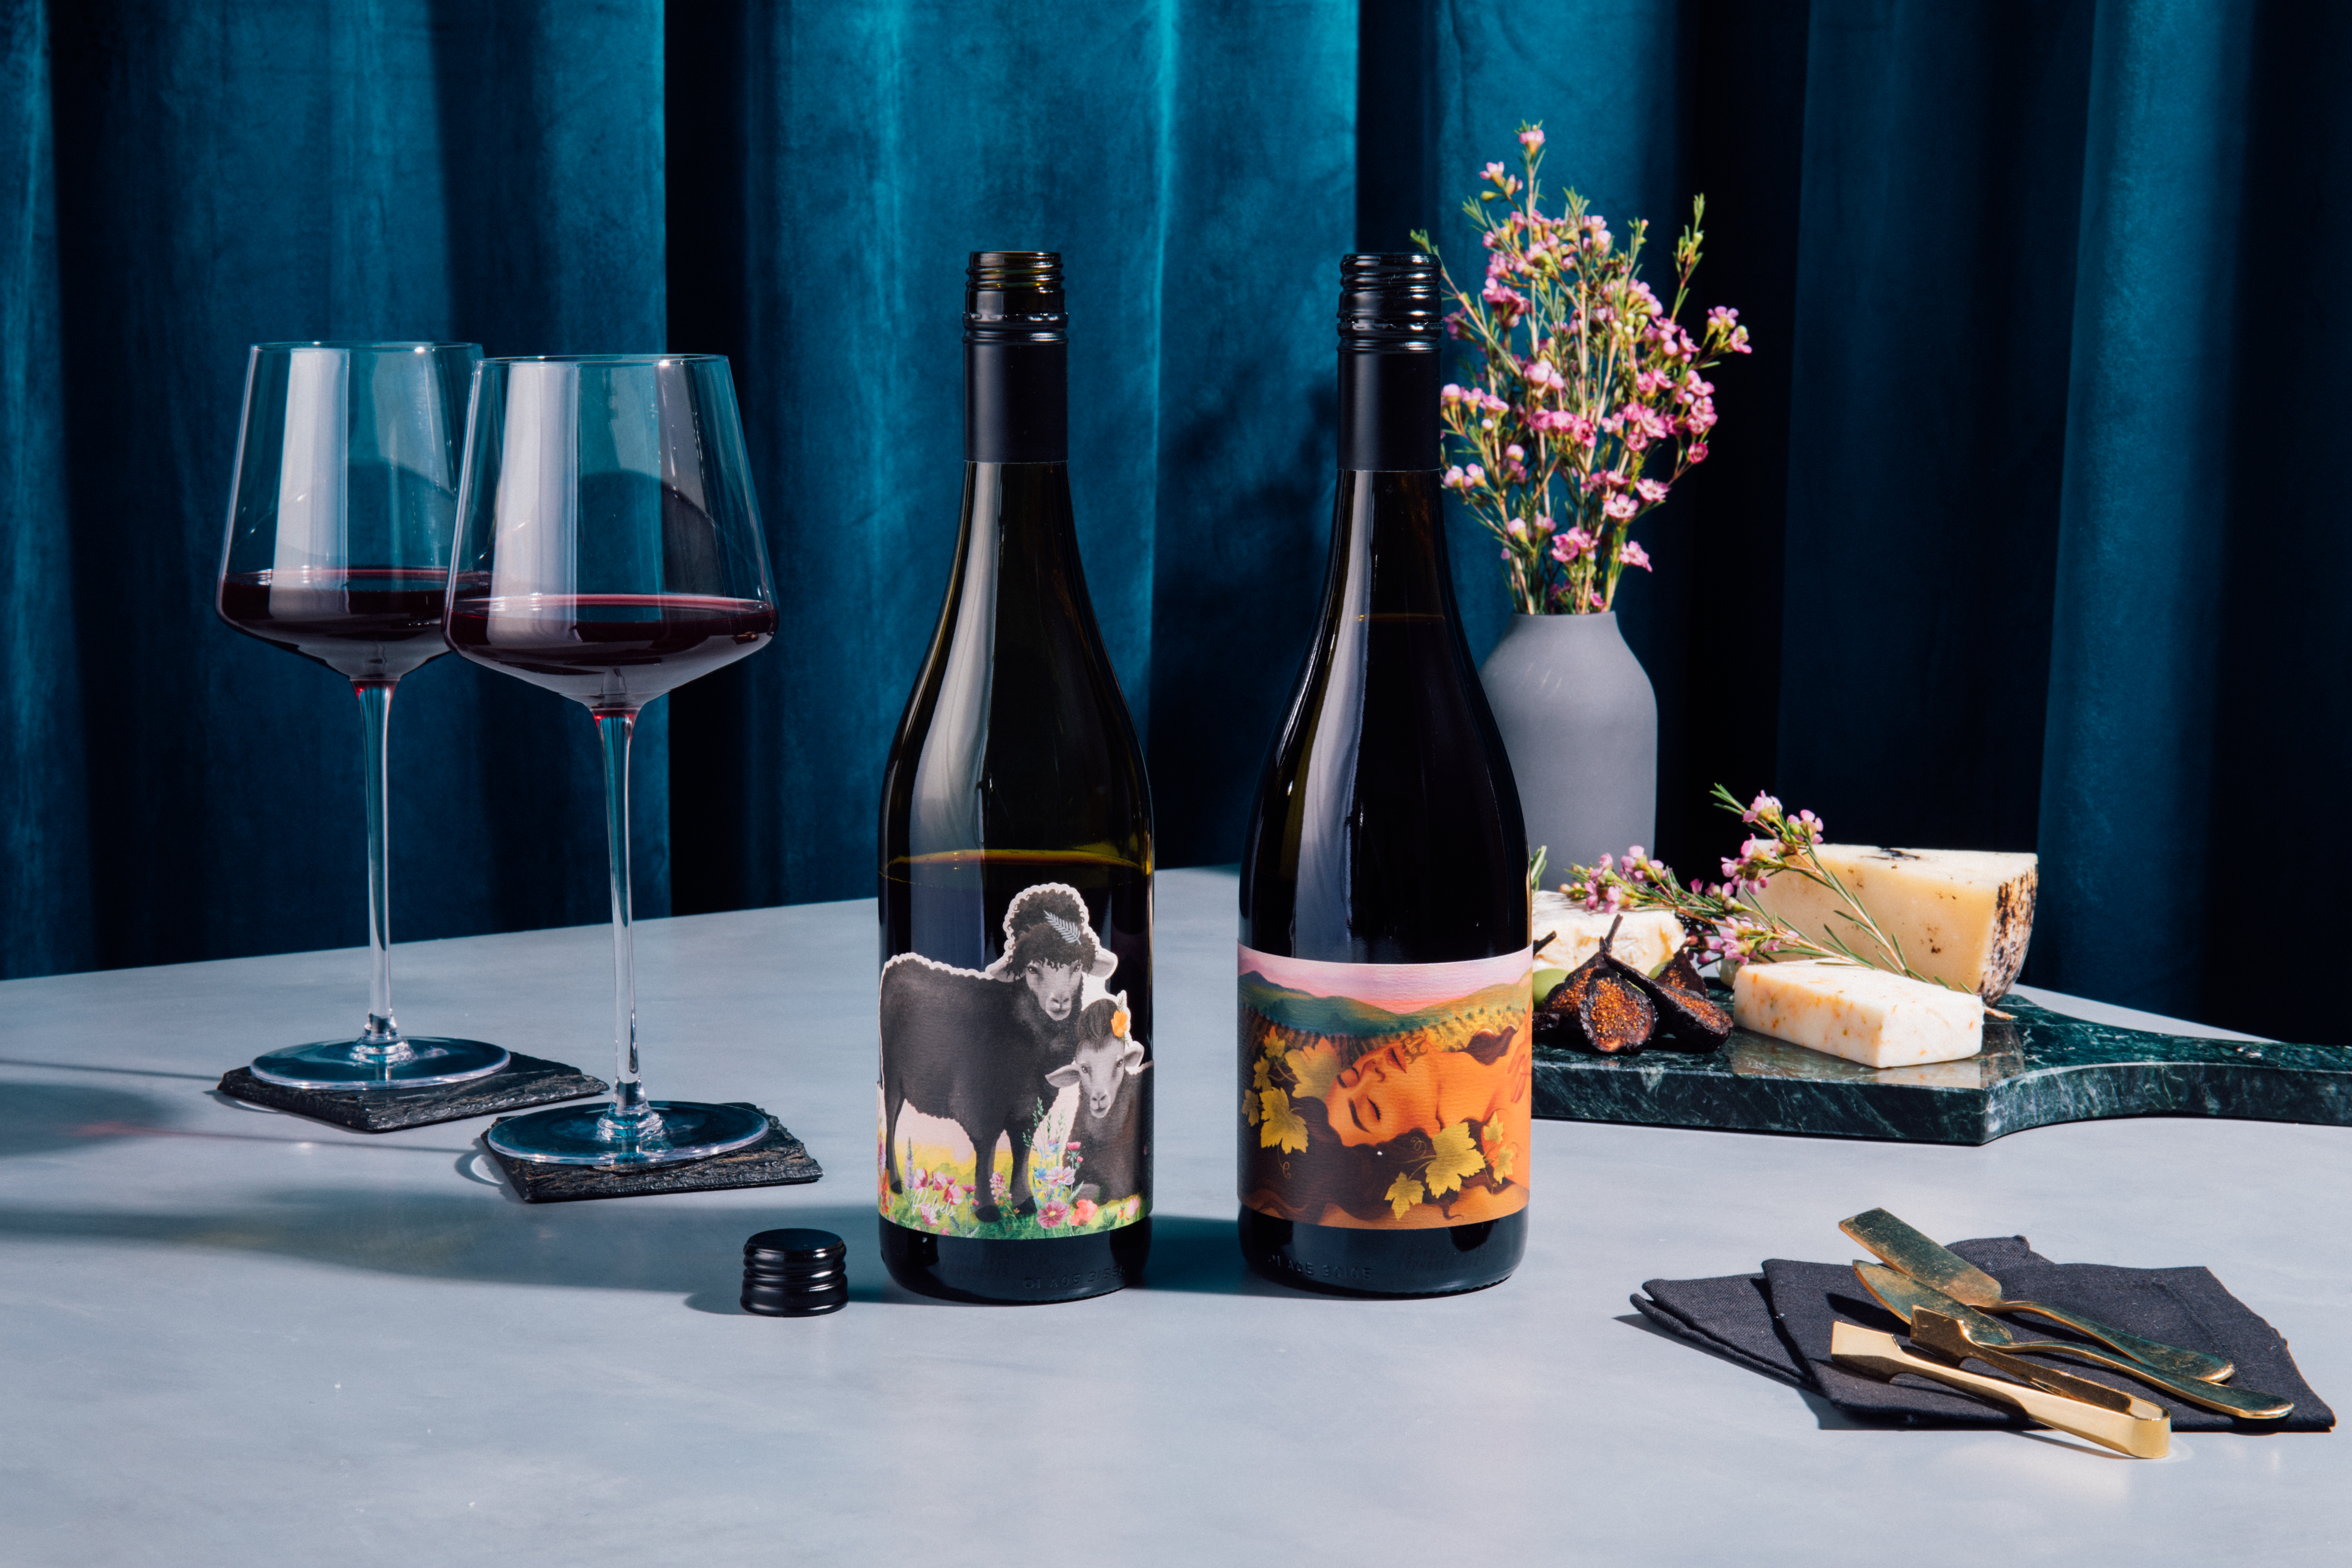 IMG 1 - mcbride - These Brands Are Reimagining What It Means to Be Sustainable in the Wine Industry